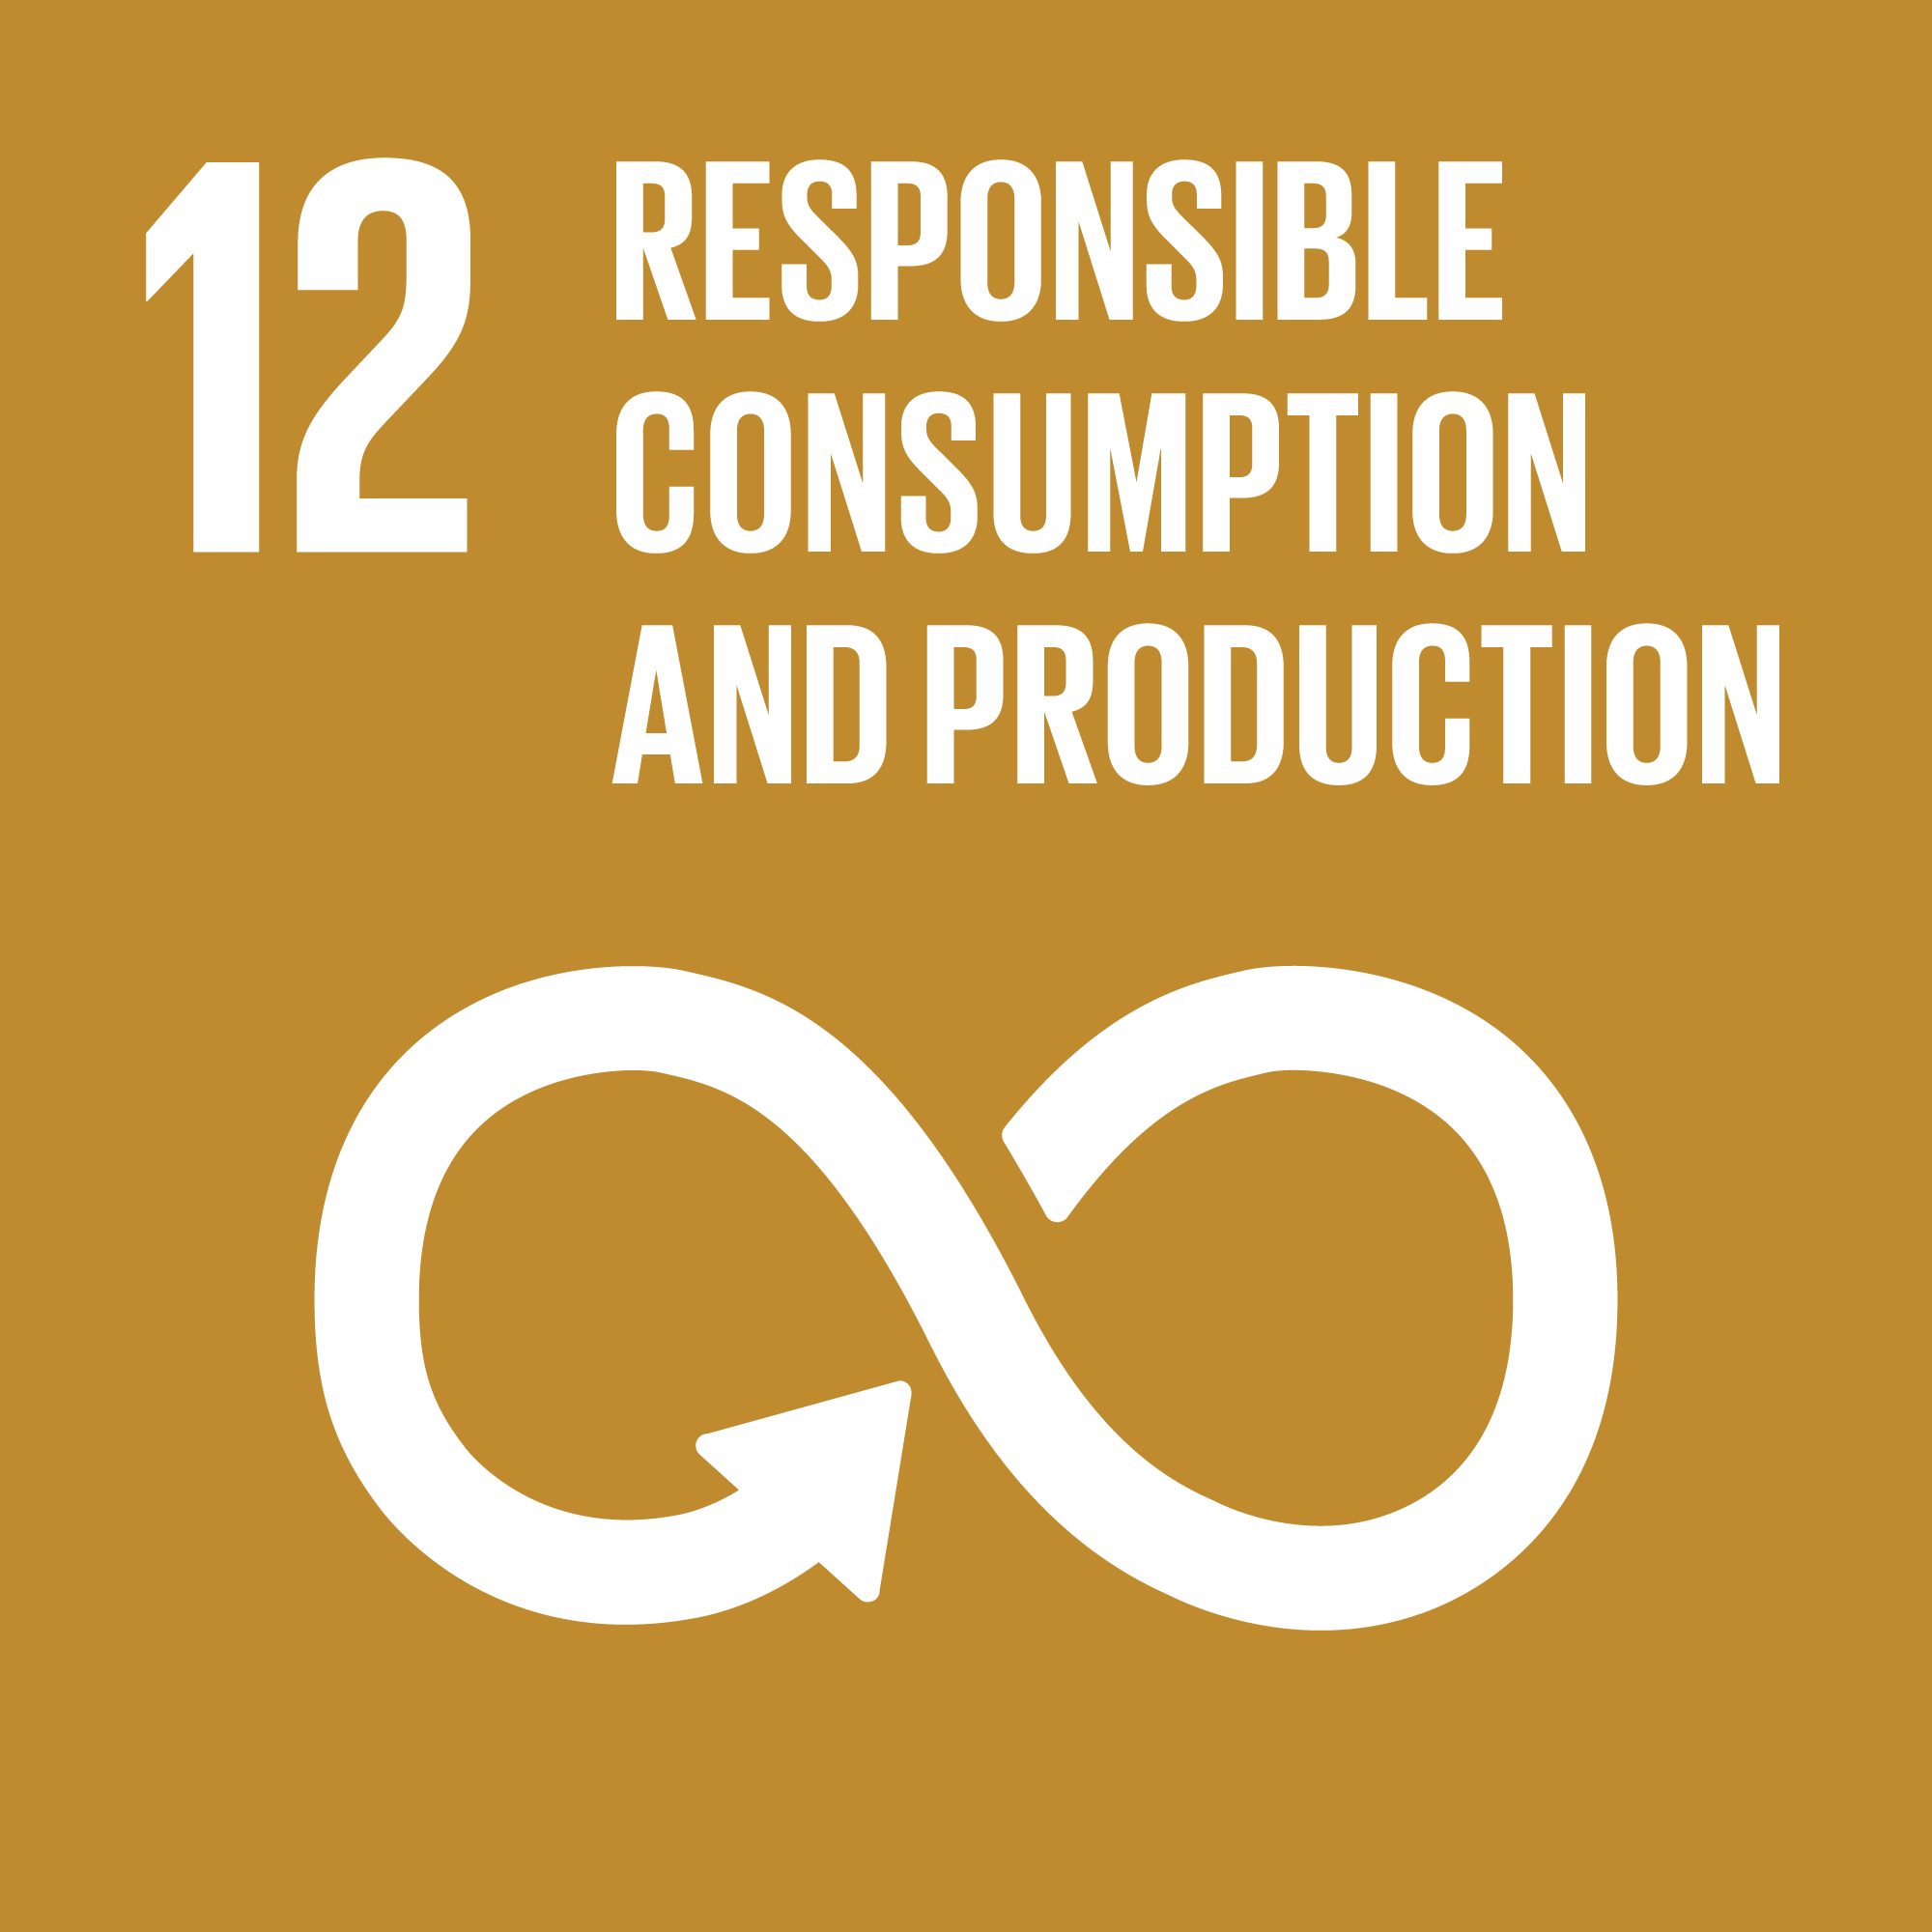 12 Responsible consumption and production